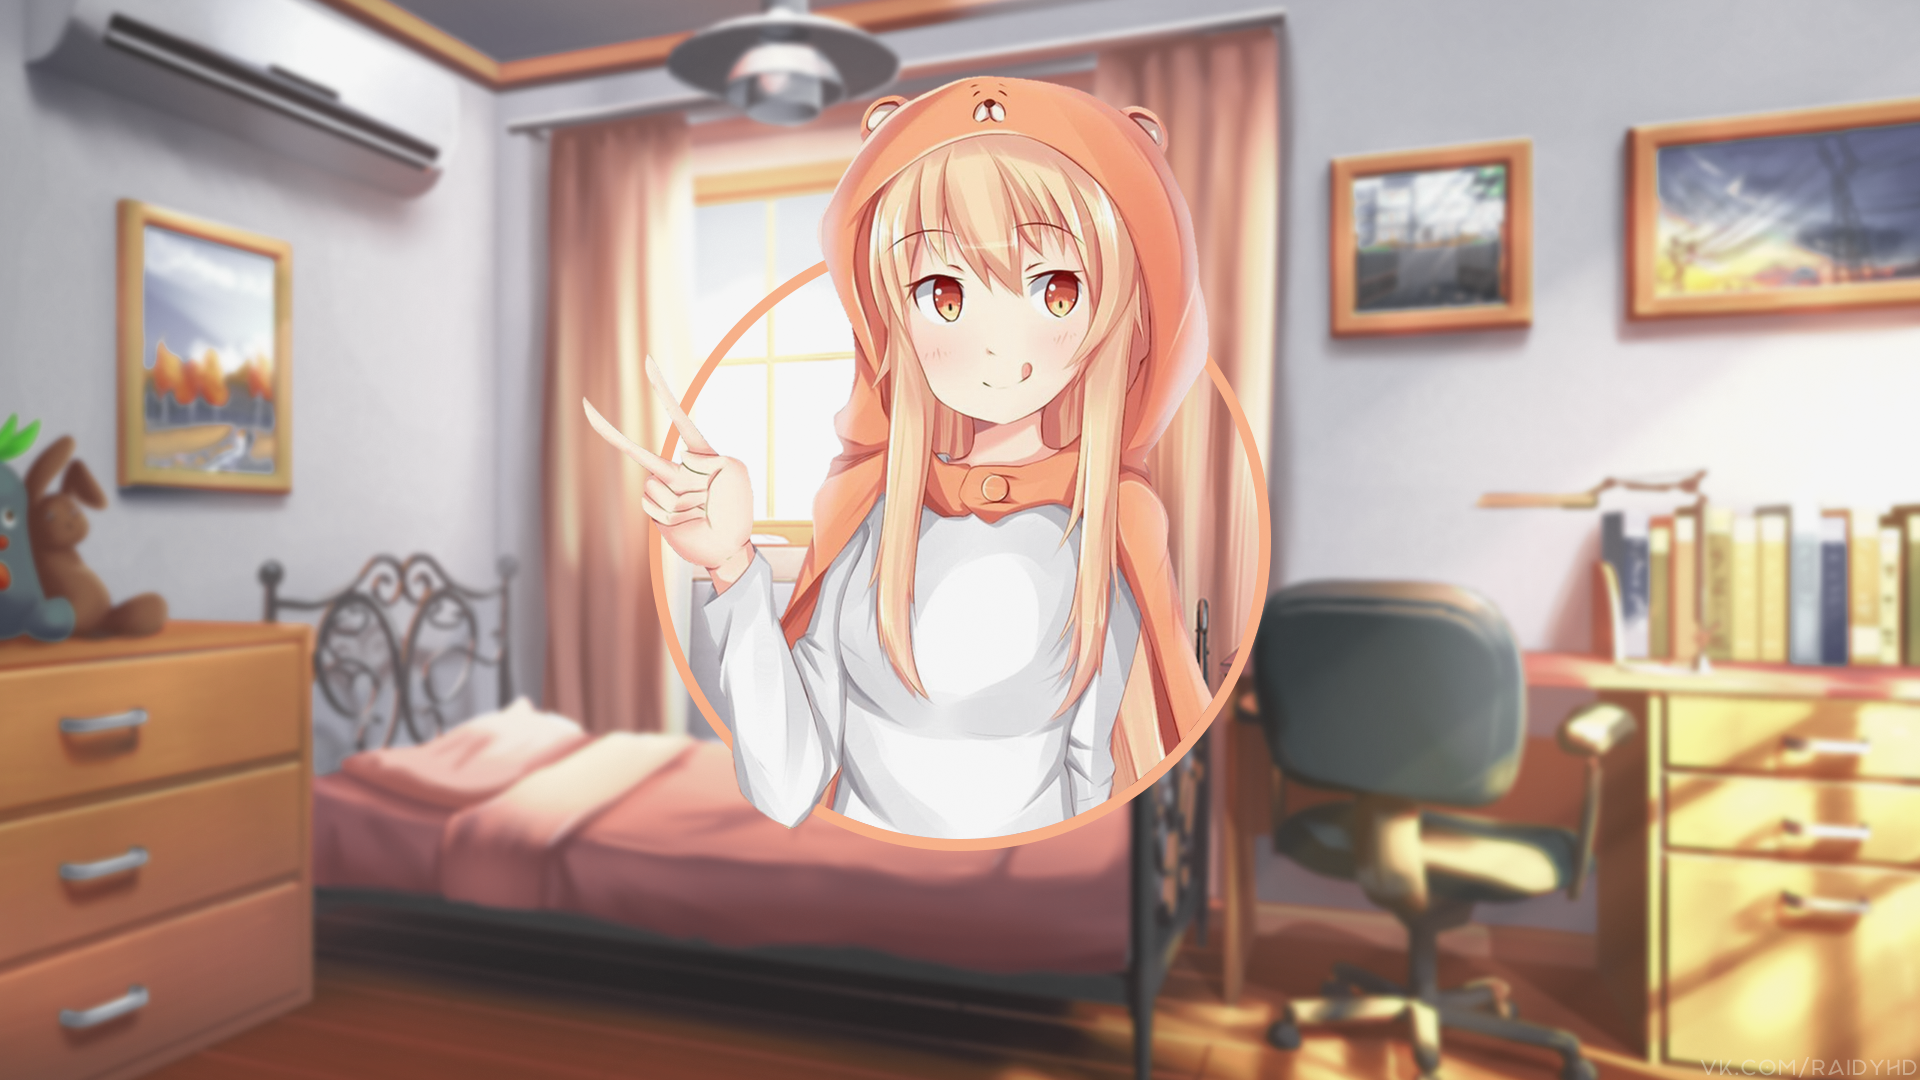 Anime 1920x1080 anime anime girls picture-in-picture Himouto! Umaru-chan Doma Umaru